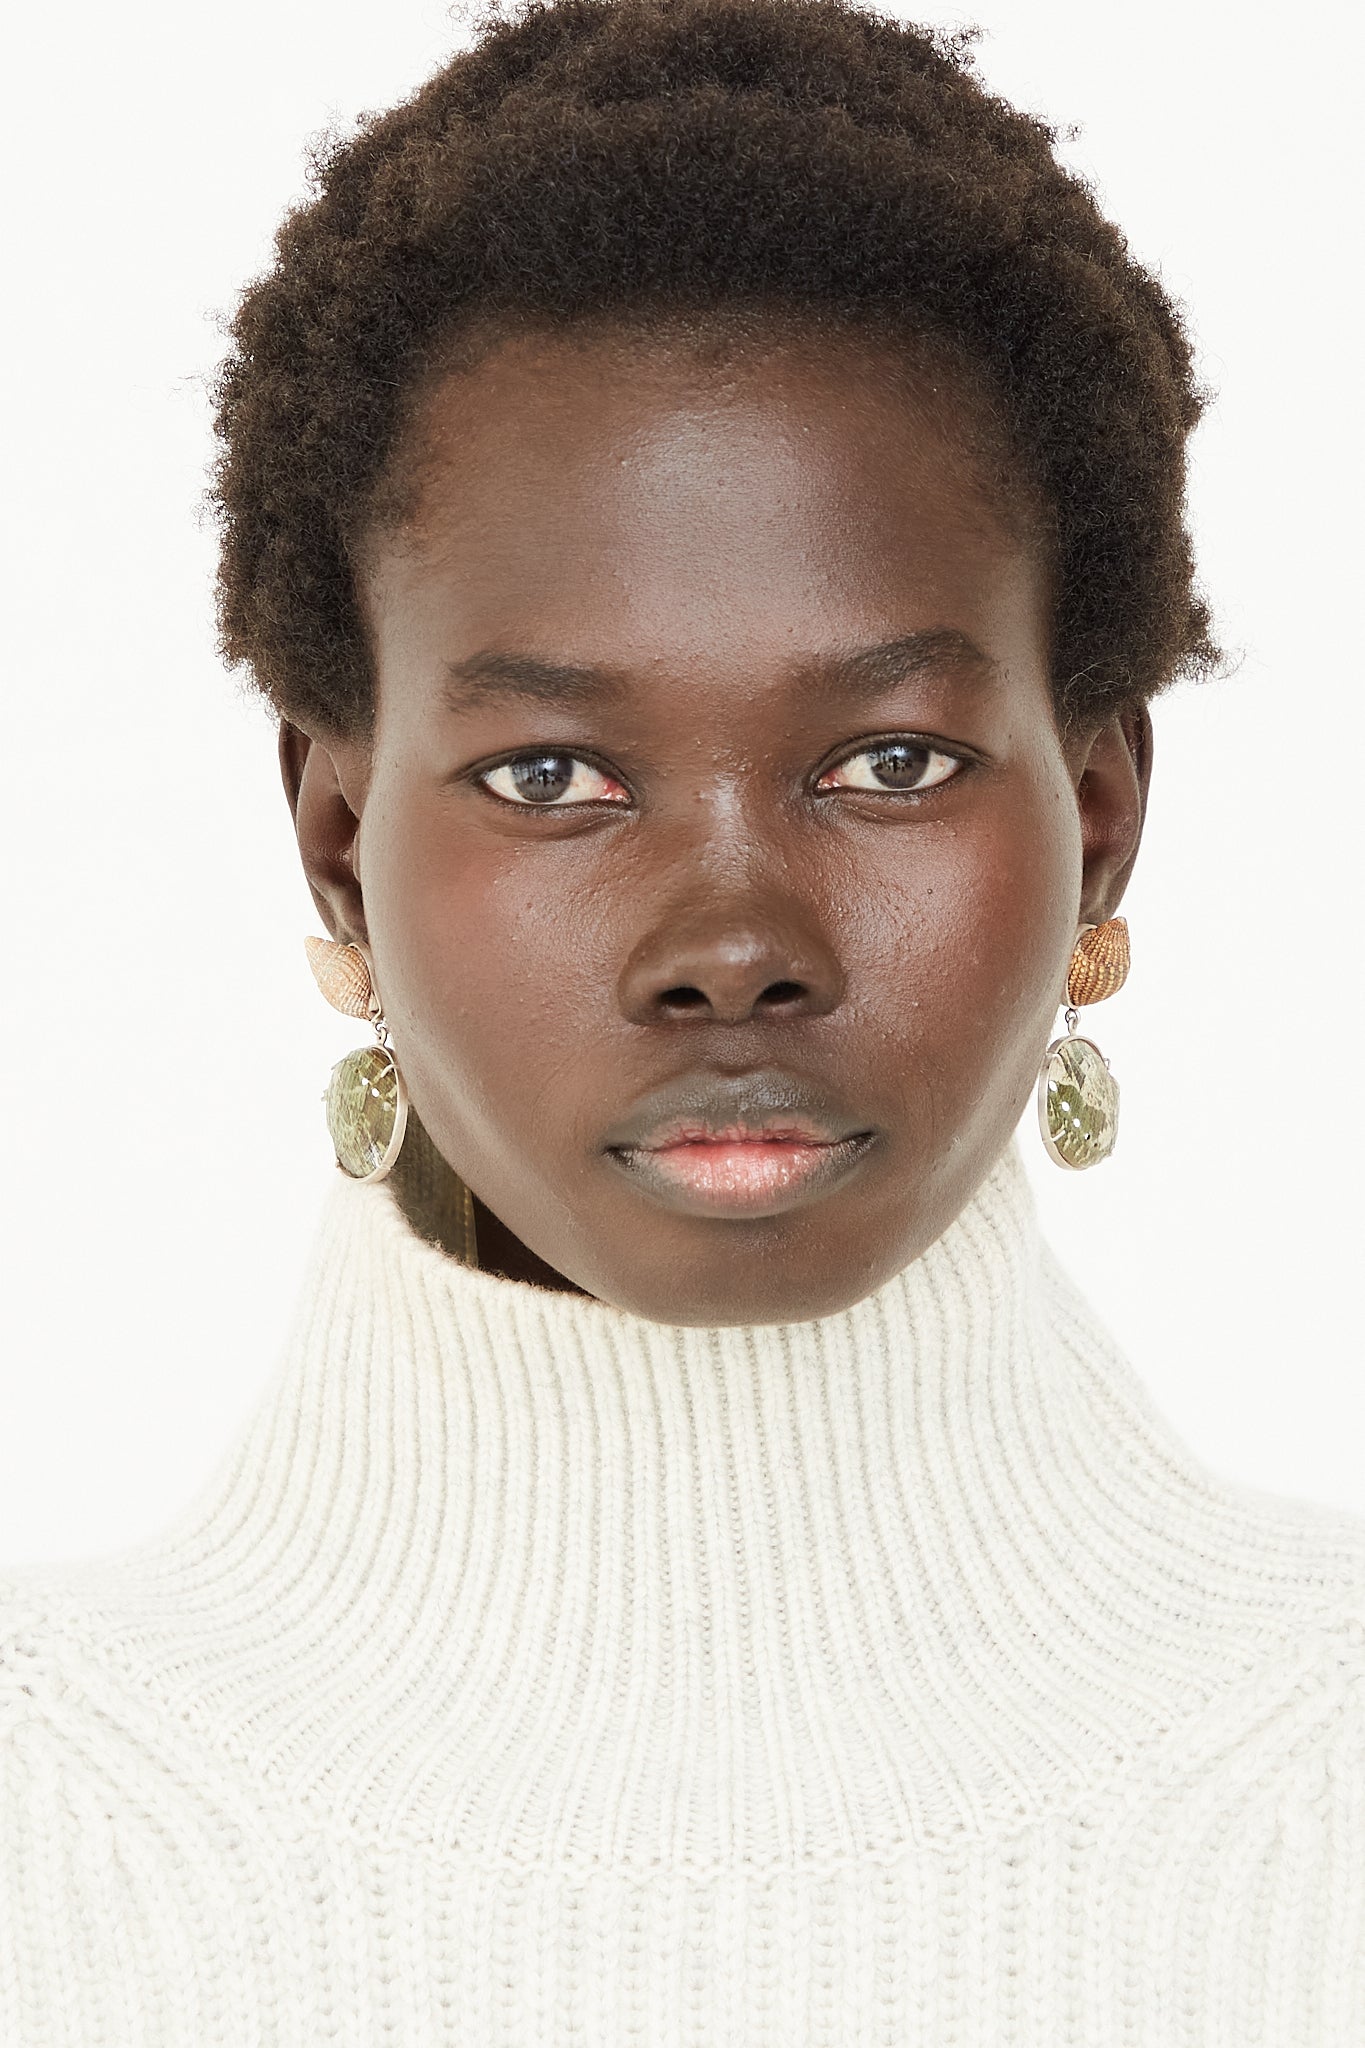 A model in NYC wearing La Mar's Sterling Silver Shell Earrings 010 and a white turtleneck sweater.